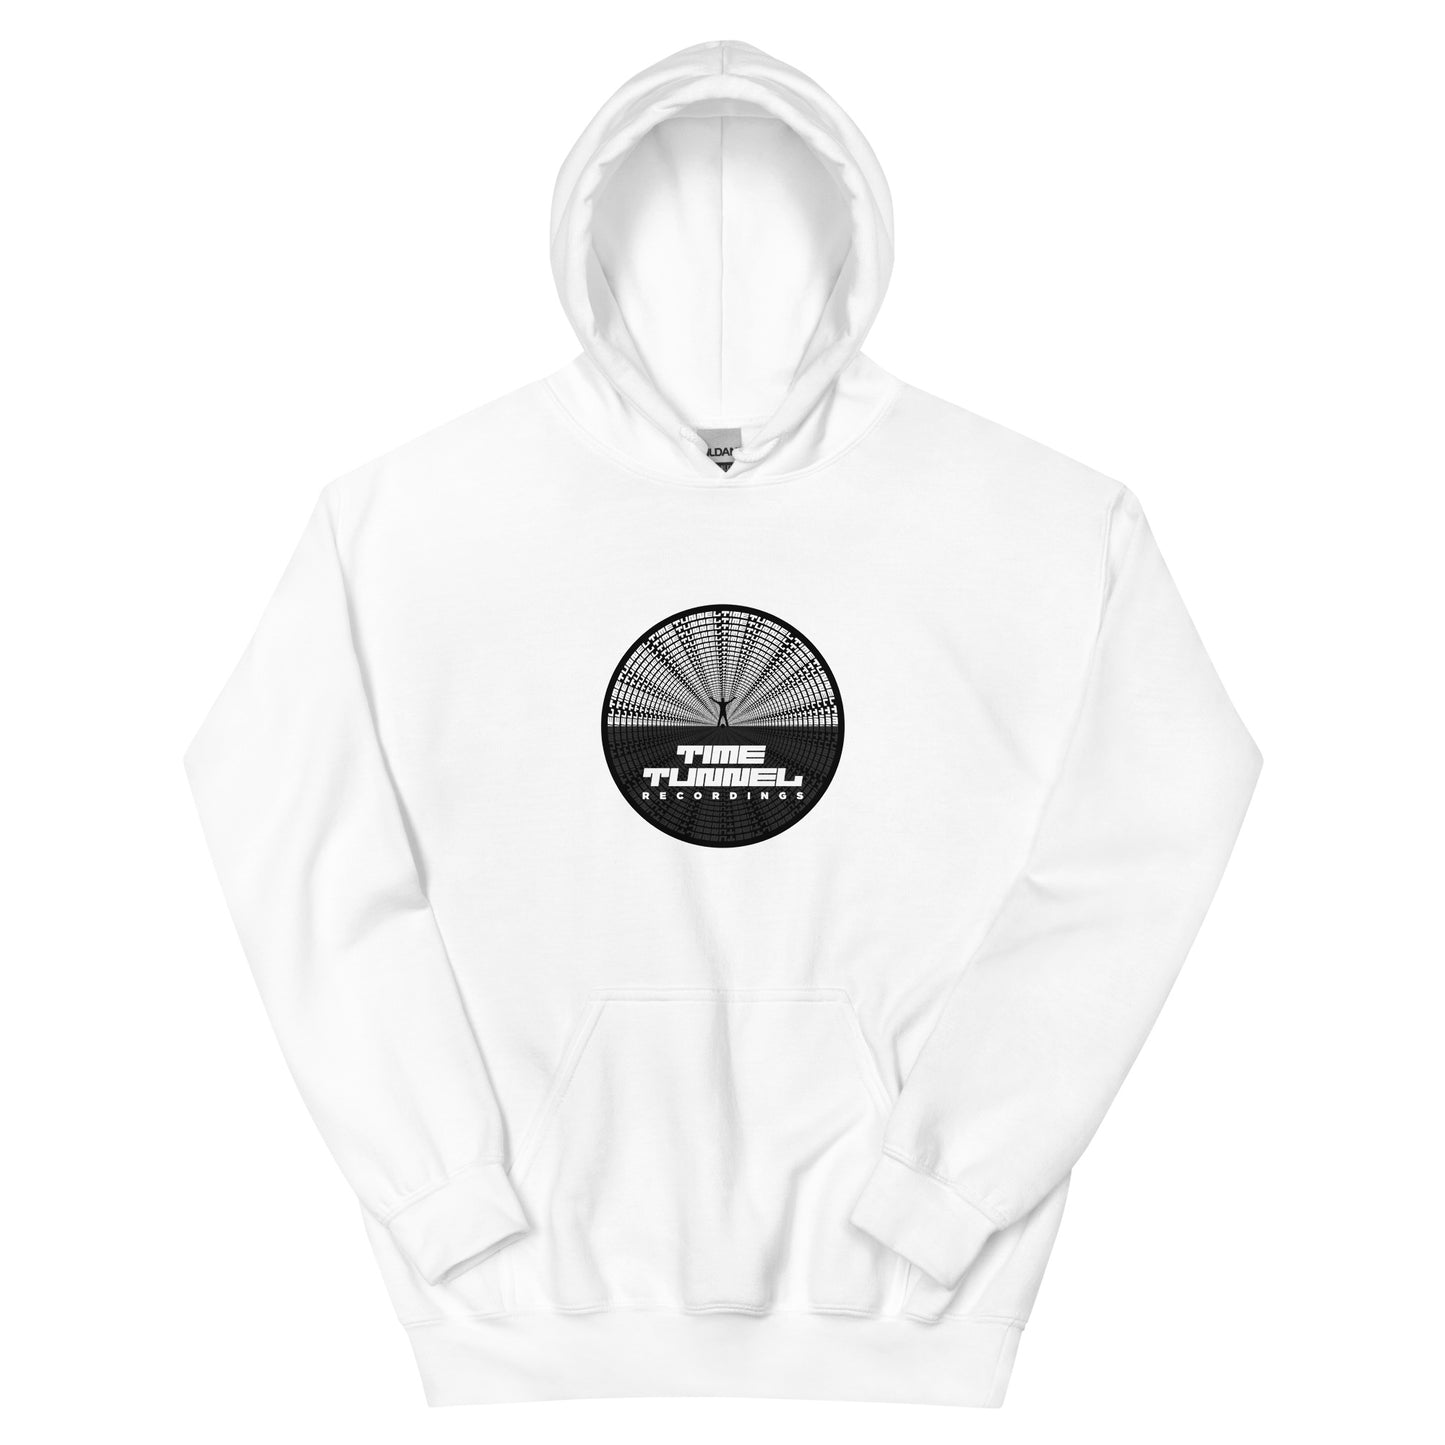 Time Tunnel (v1) Unisex Hoodie